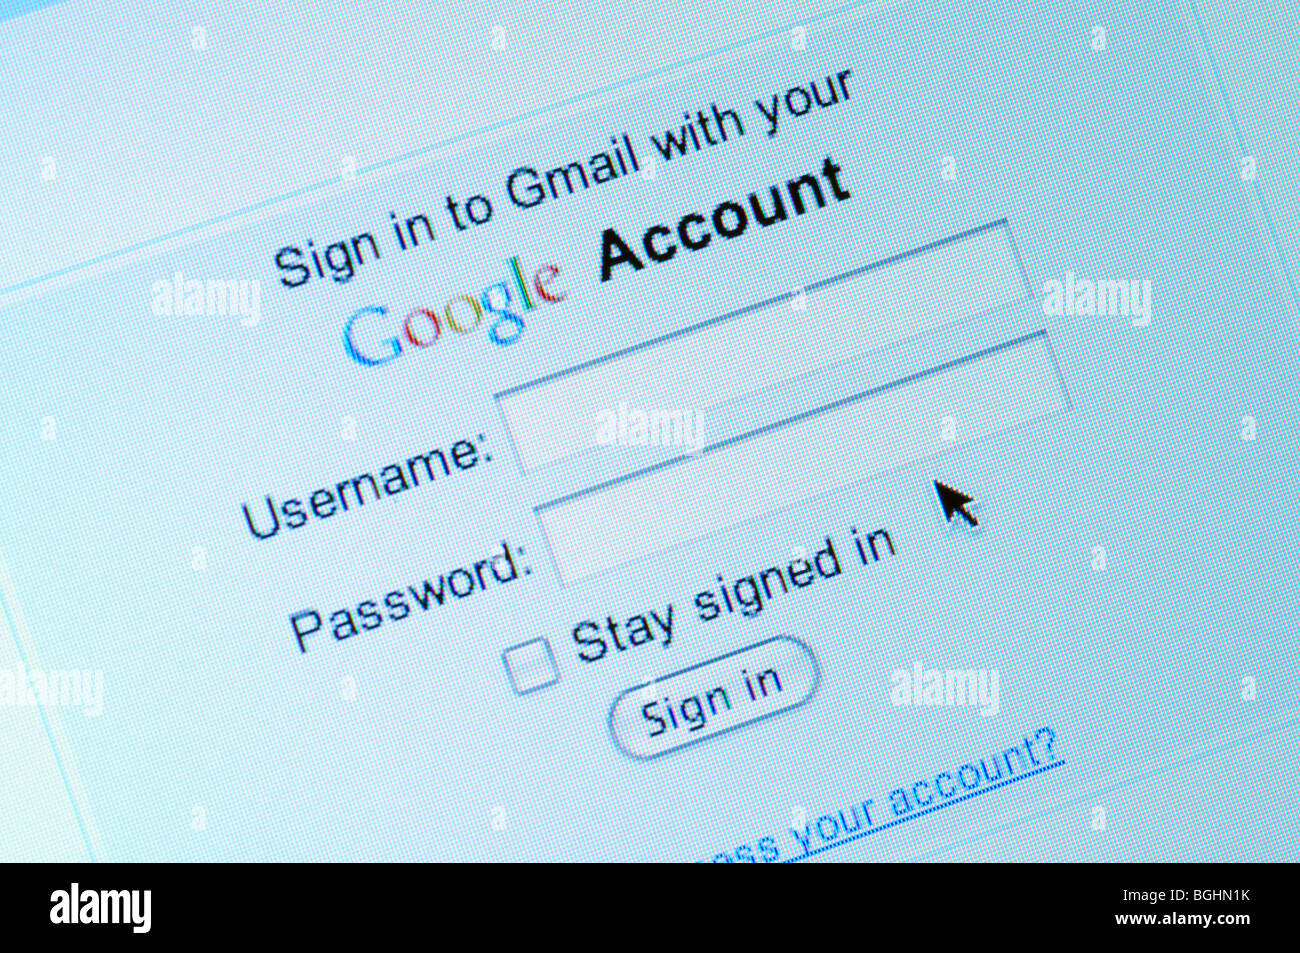 Login page gmail Sign in